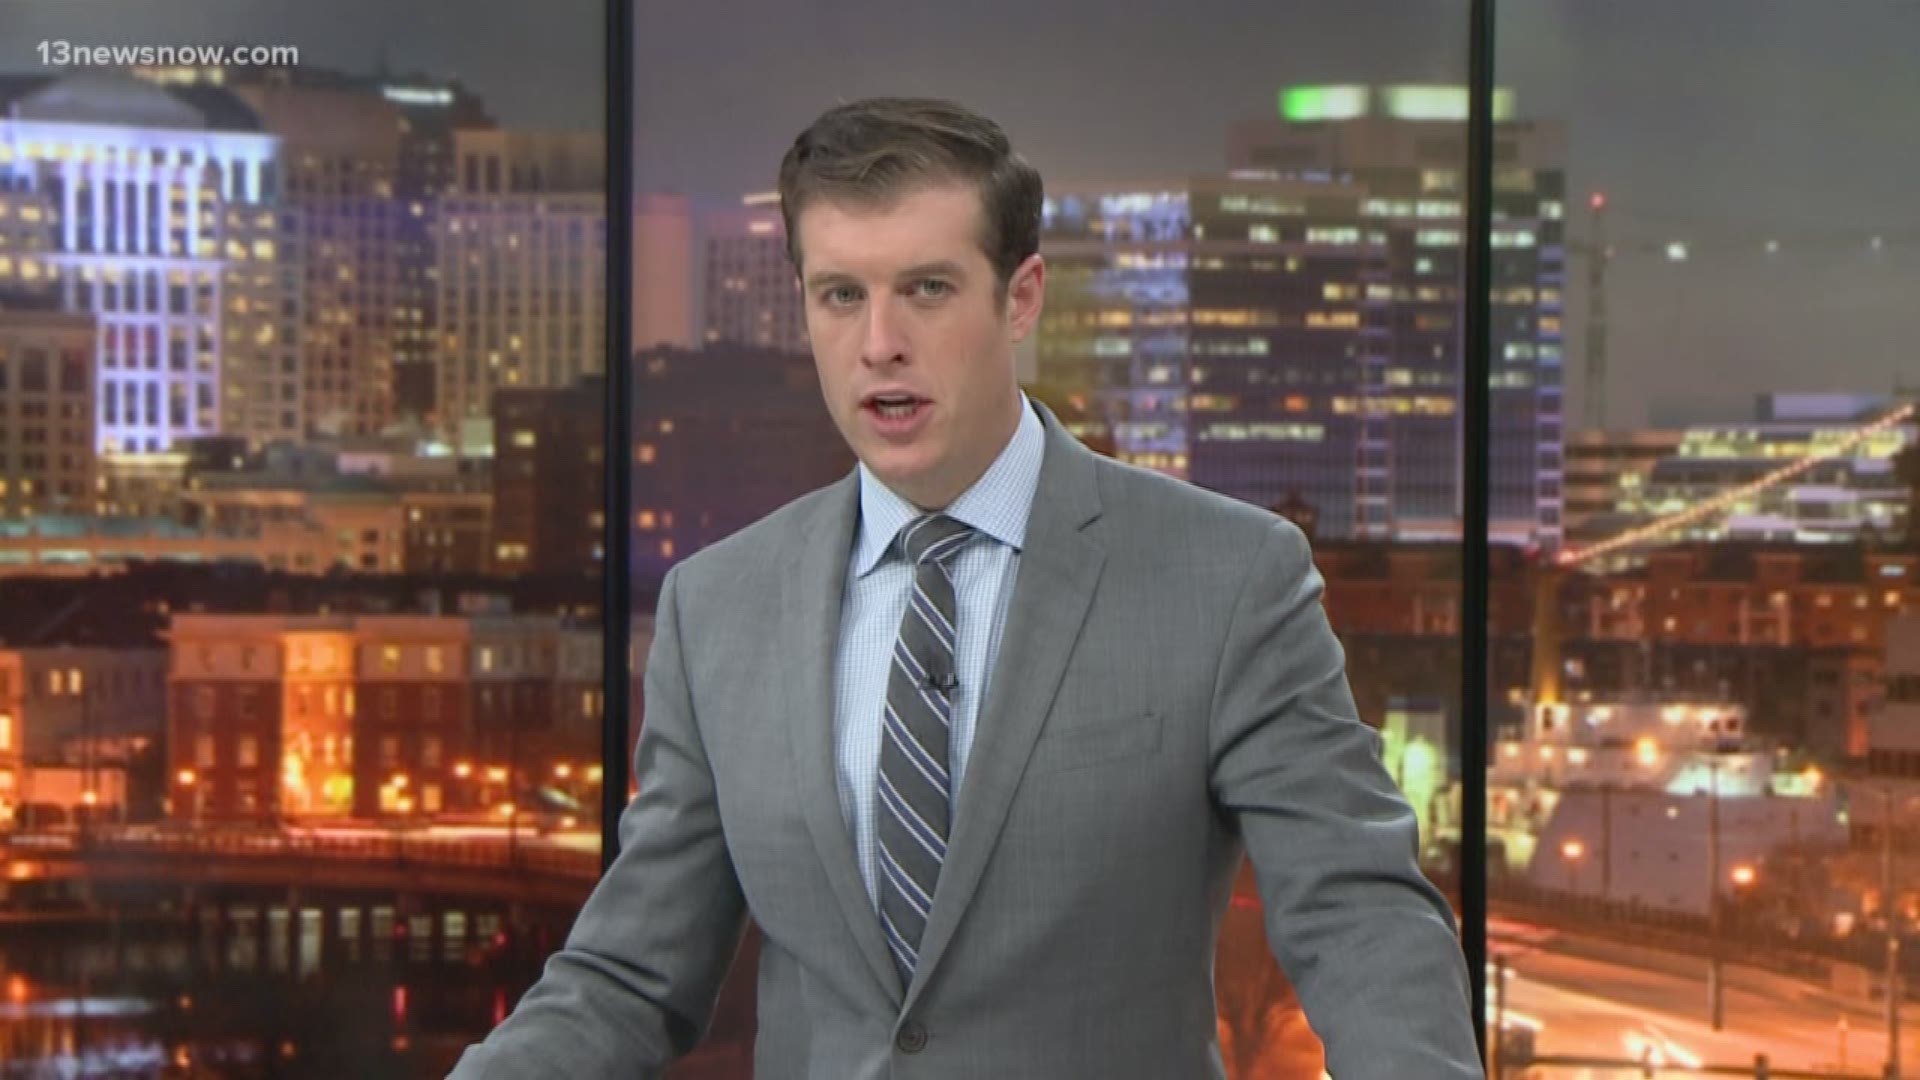 Top Stories from 13News Now at Daybreak with Dan Kennedy.